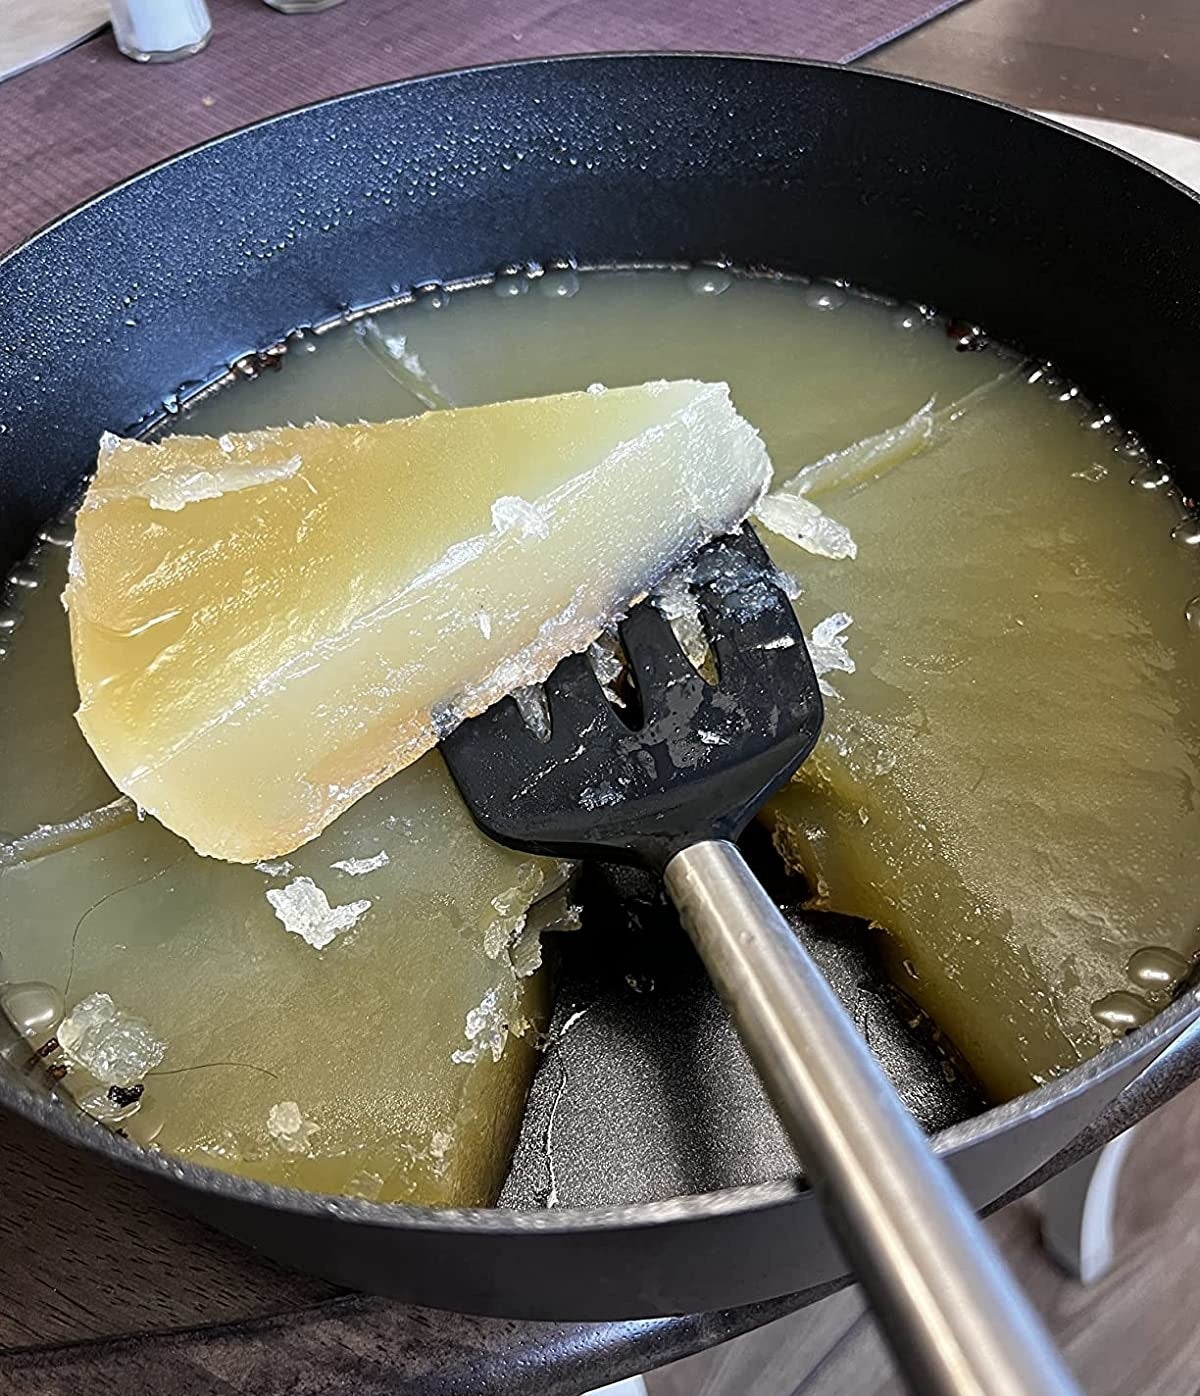 Reviewer image of solidified grease in a pan